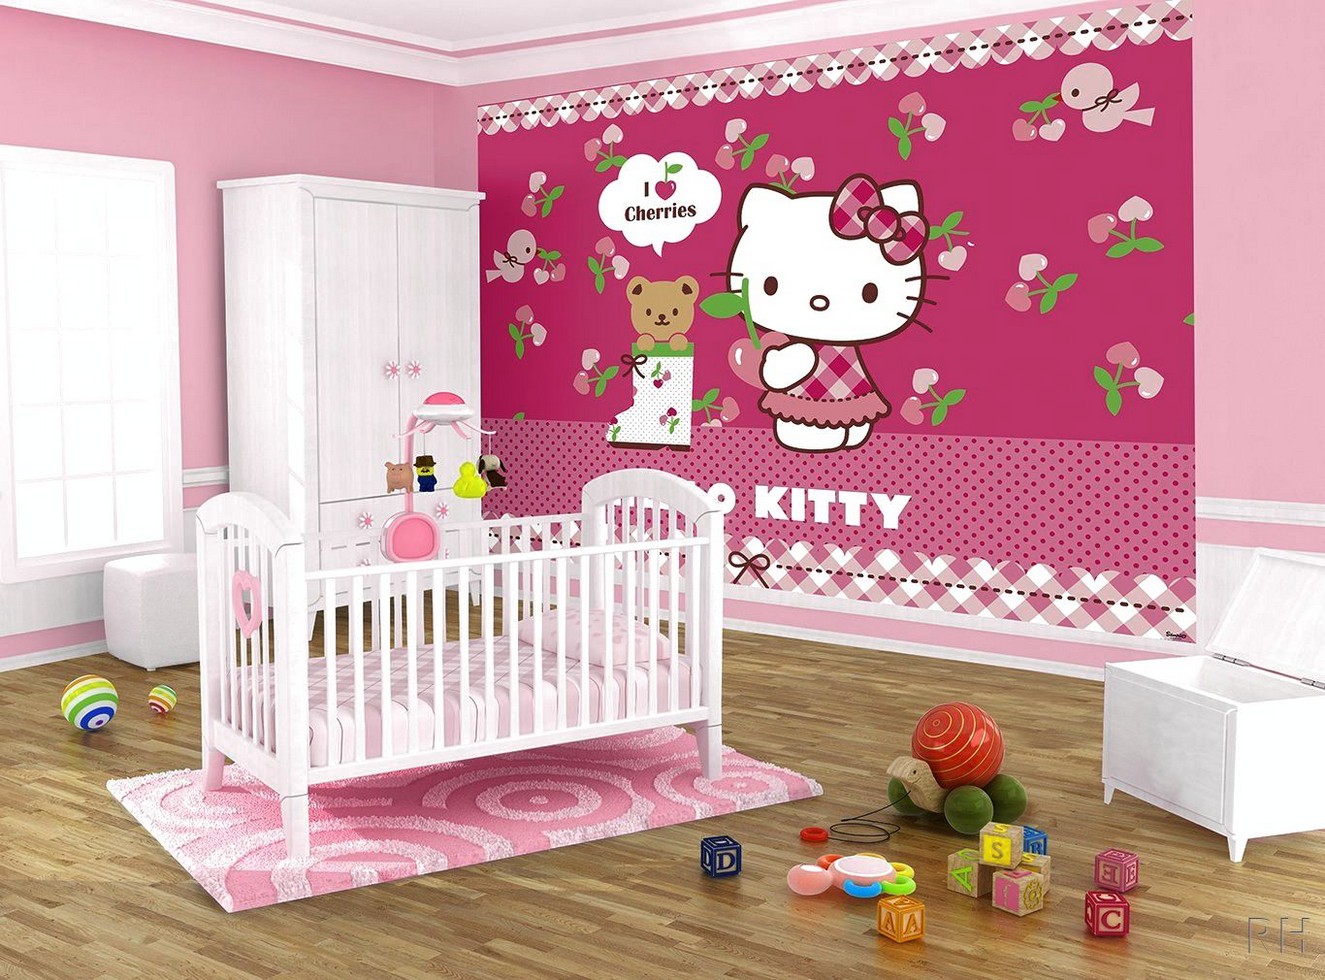 wallpaper hello kitty untuk kamar,product,pink,room,infant bed,wall sticker